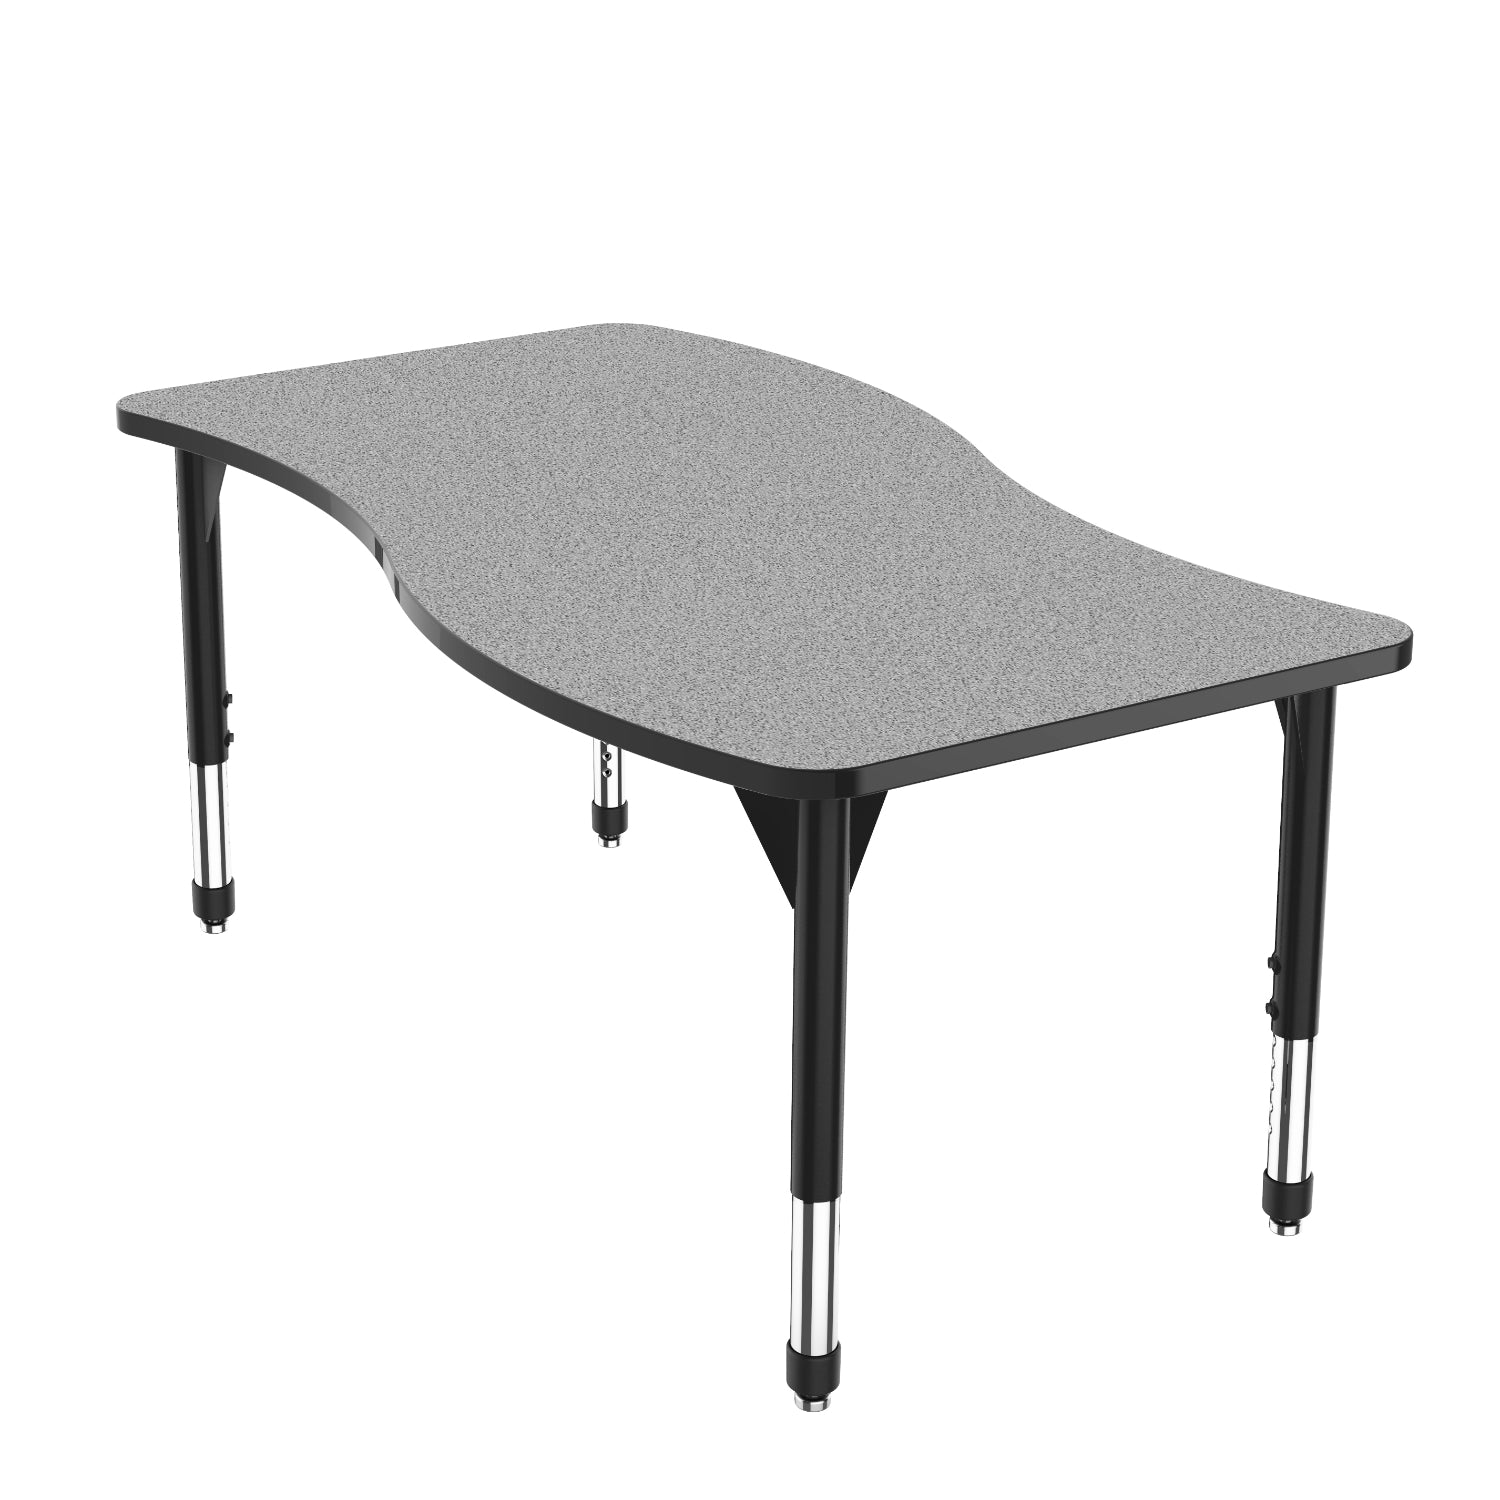 Premier Sitting Height Collaborative Classroom Table, 30" x 60" Wave